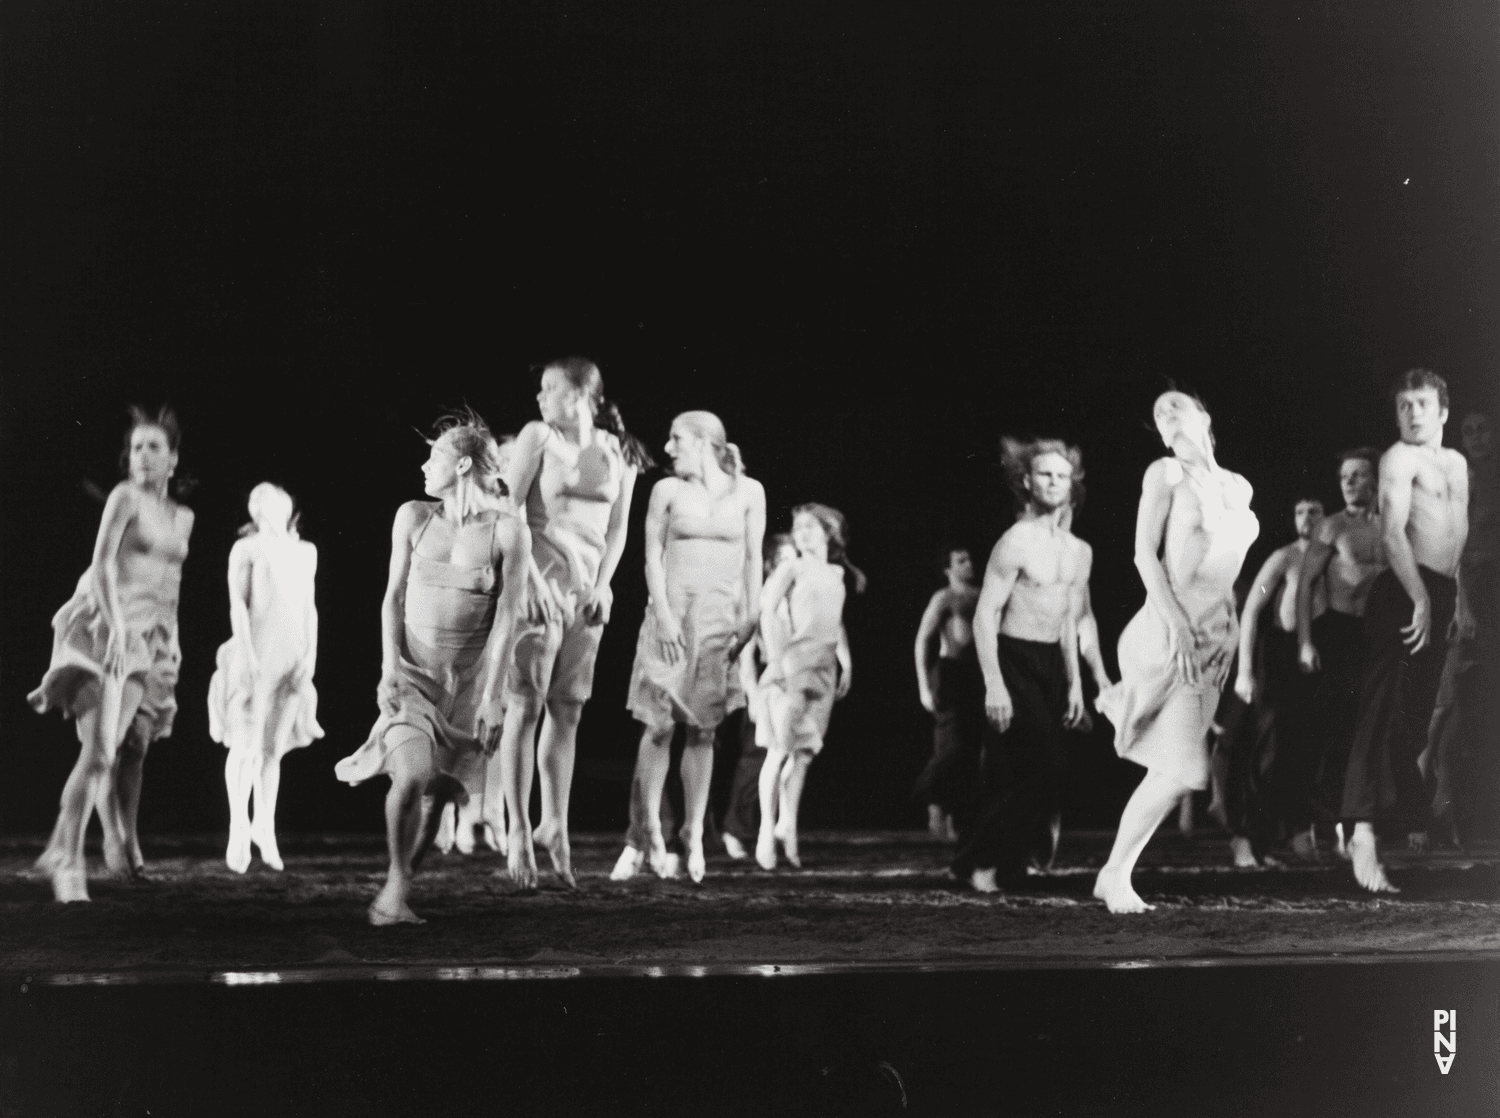 Josephine Ann Endicott and Michael Diekamp in “The Rite of Spring” by Pina Bausch